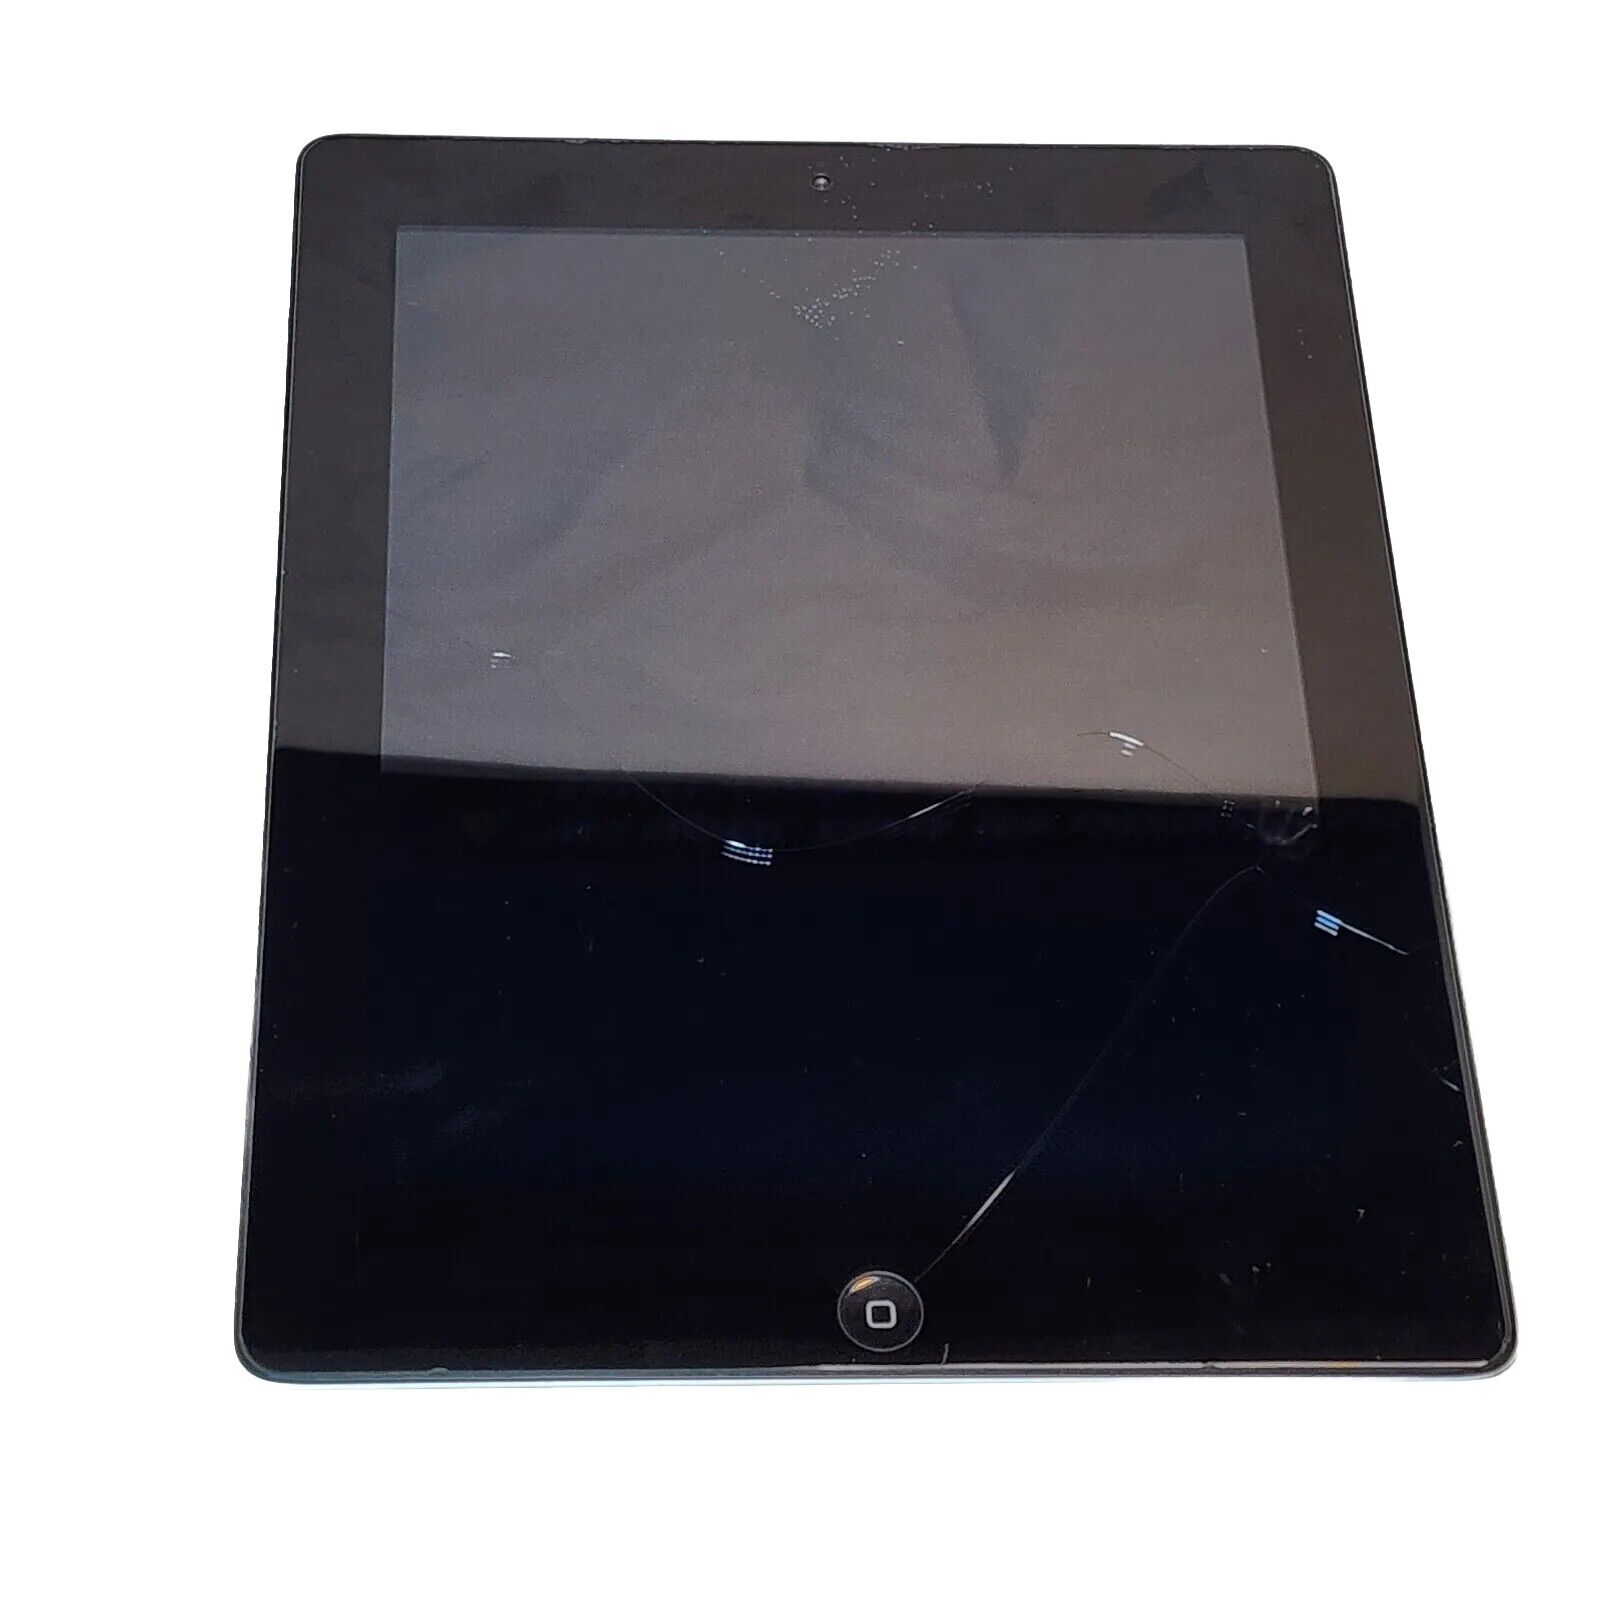 Apple iPad 3rd Gen 64GB Wi-Fi Model A1416 Gray For Parts Locked Cracked Screen